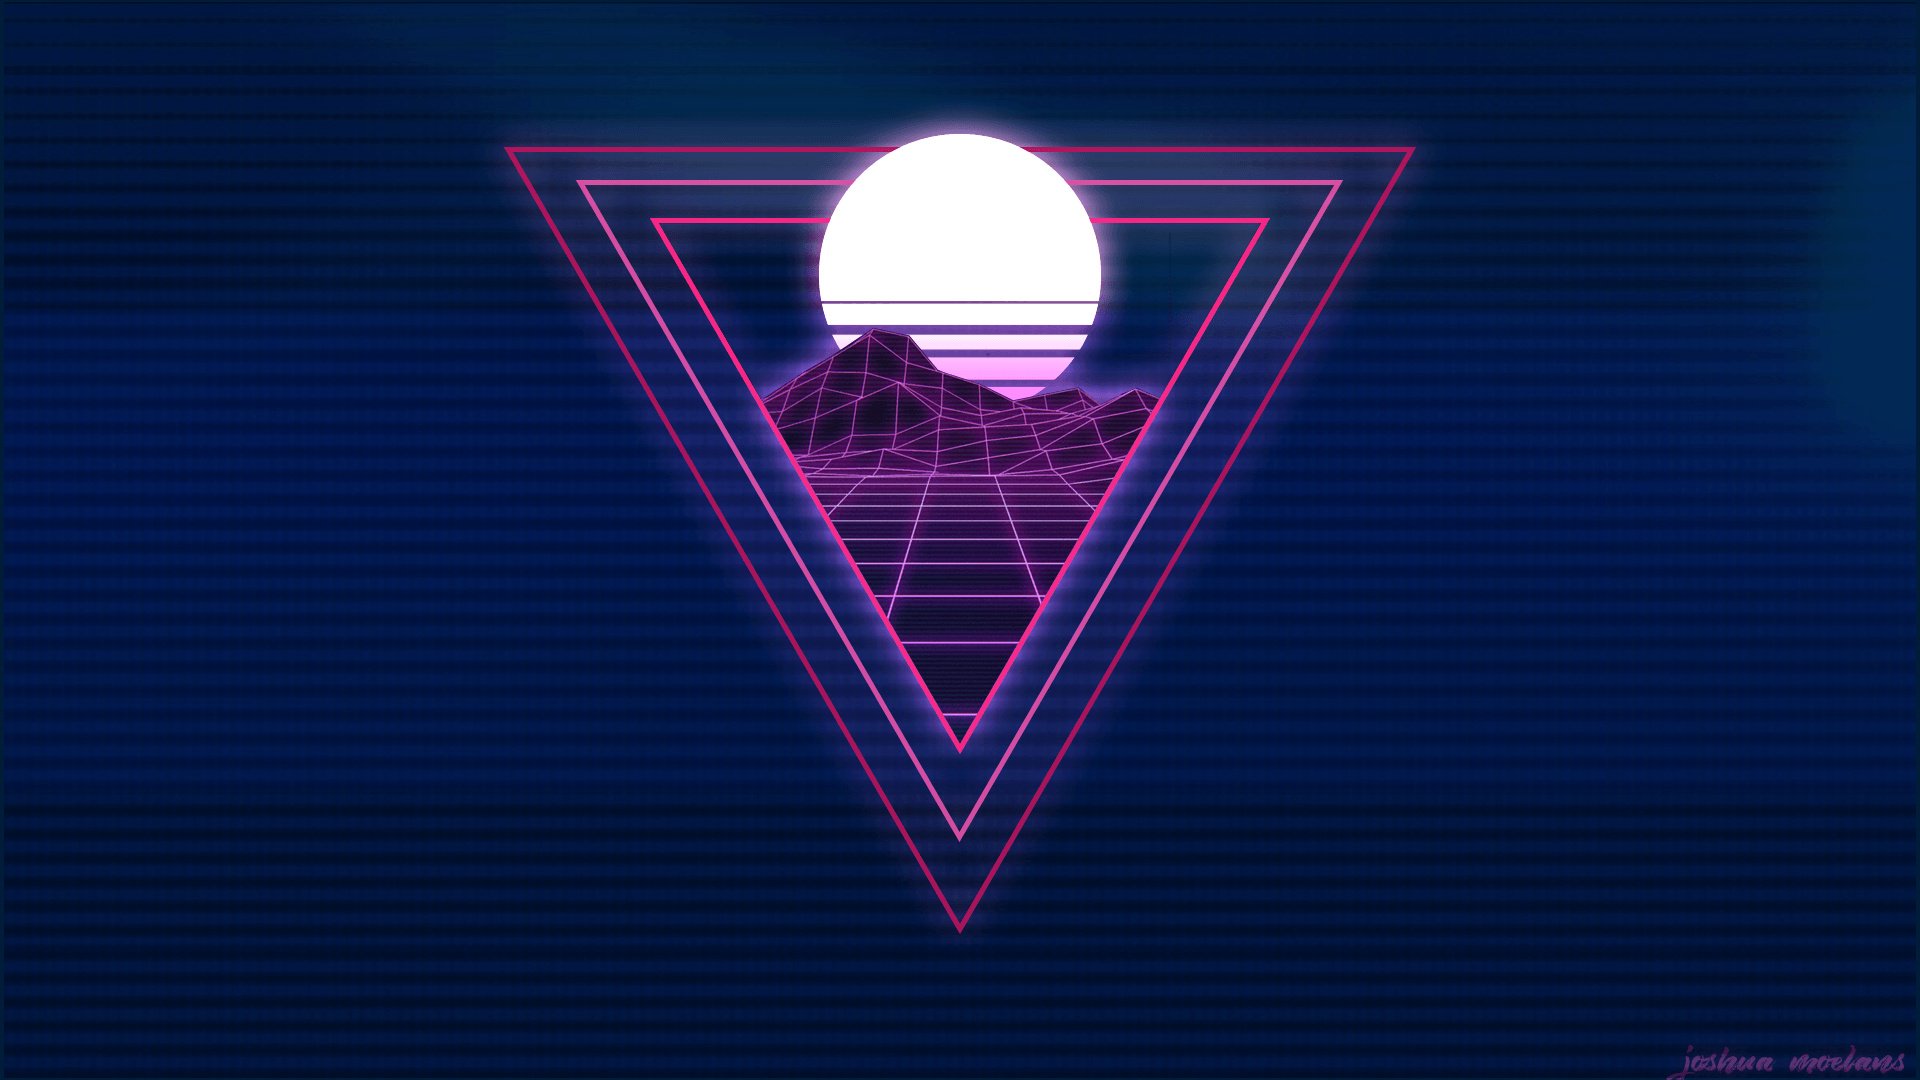 My Retro Neon Style Wallpaper, Got Told It'd Fit Here